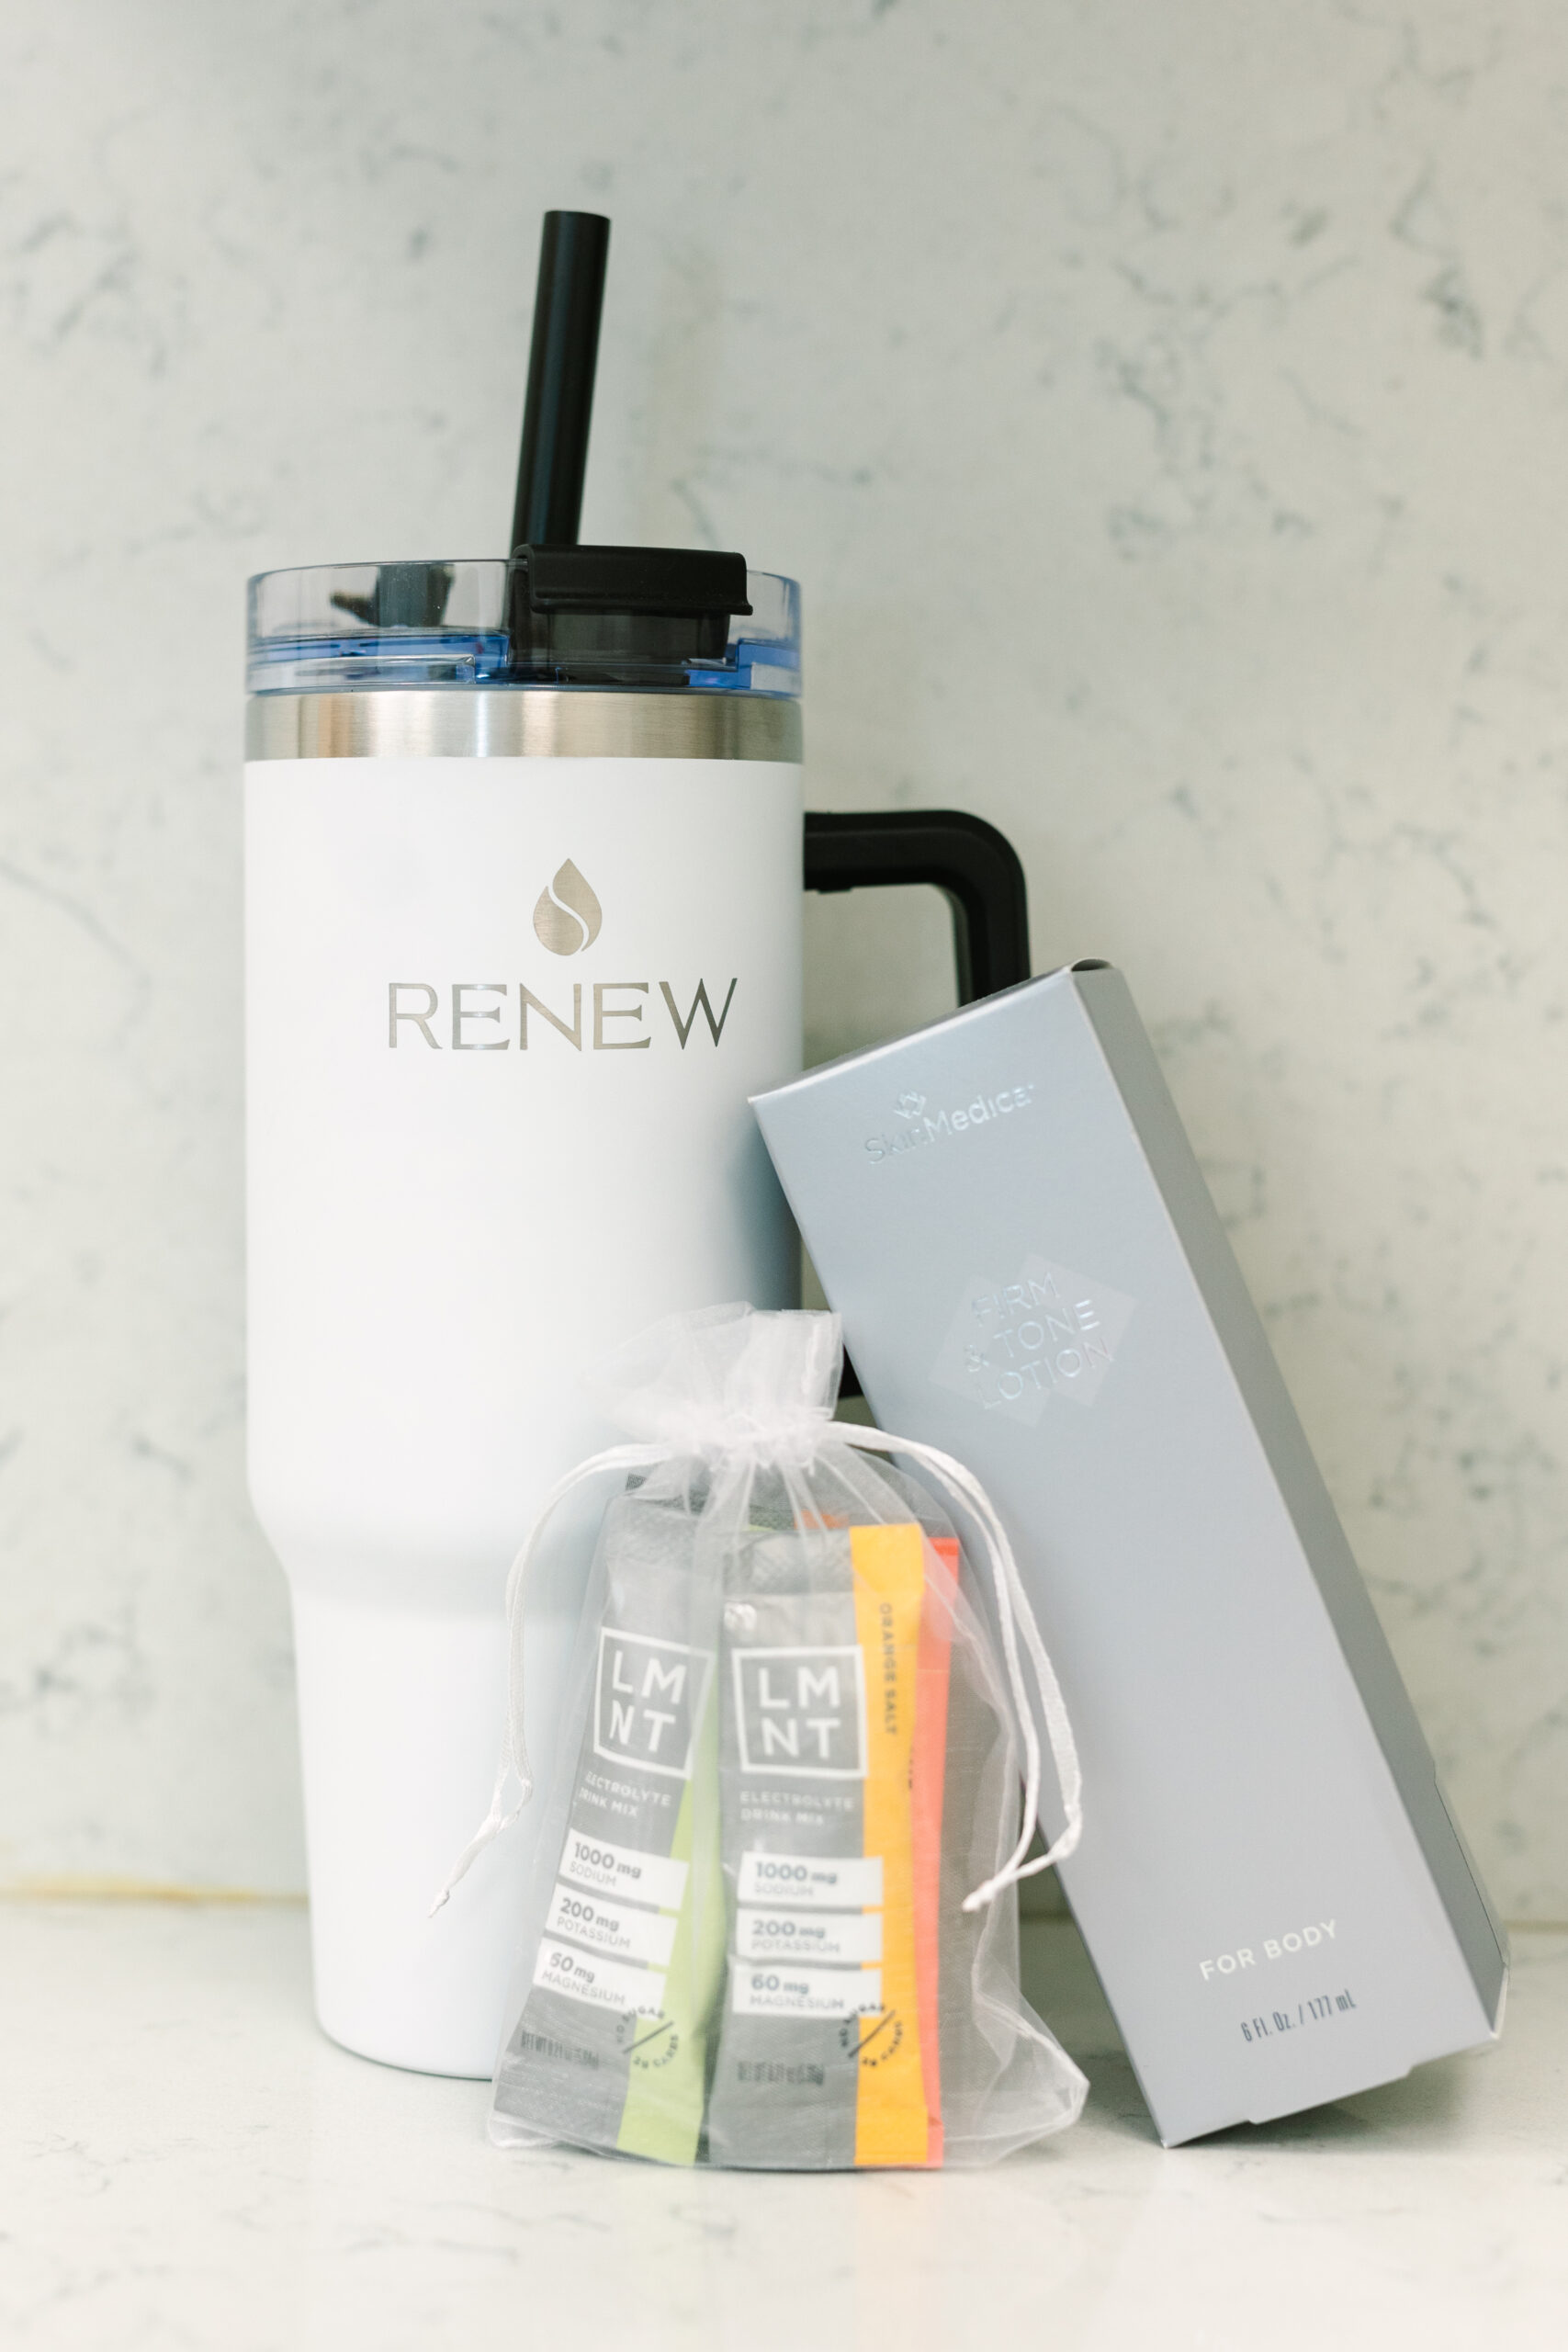 Get Ready For Summer With Physiq at Renew!